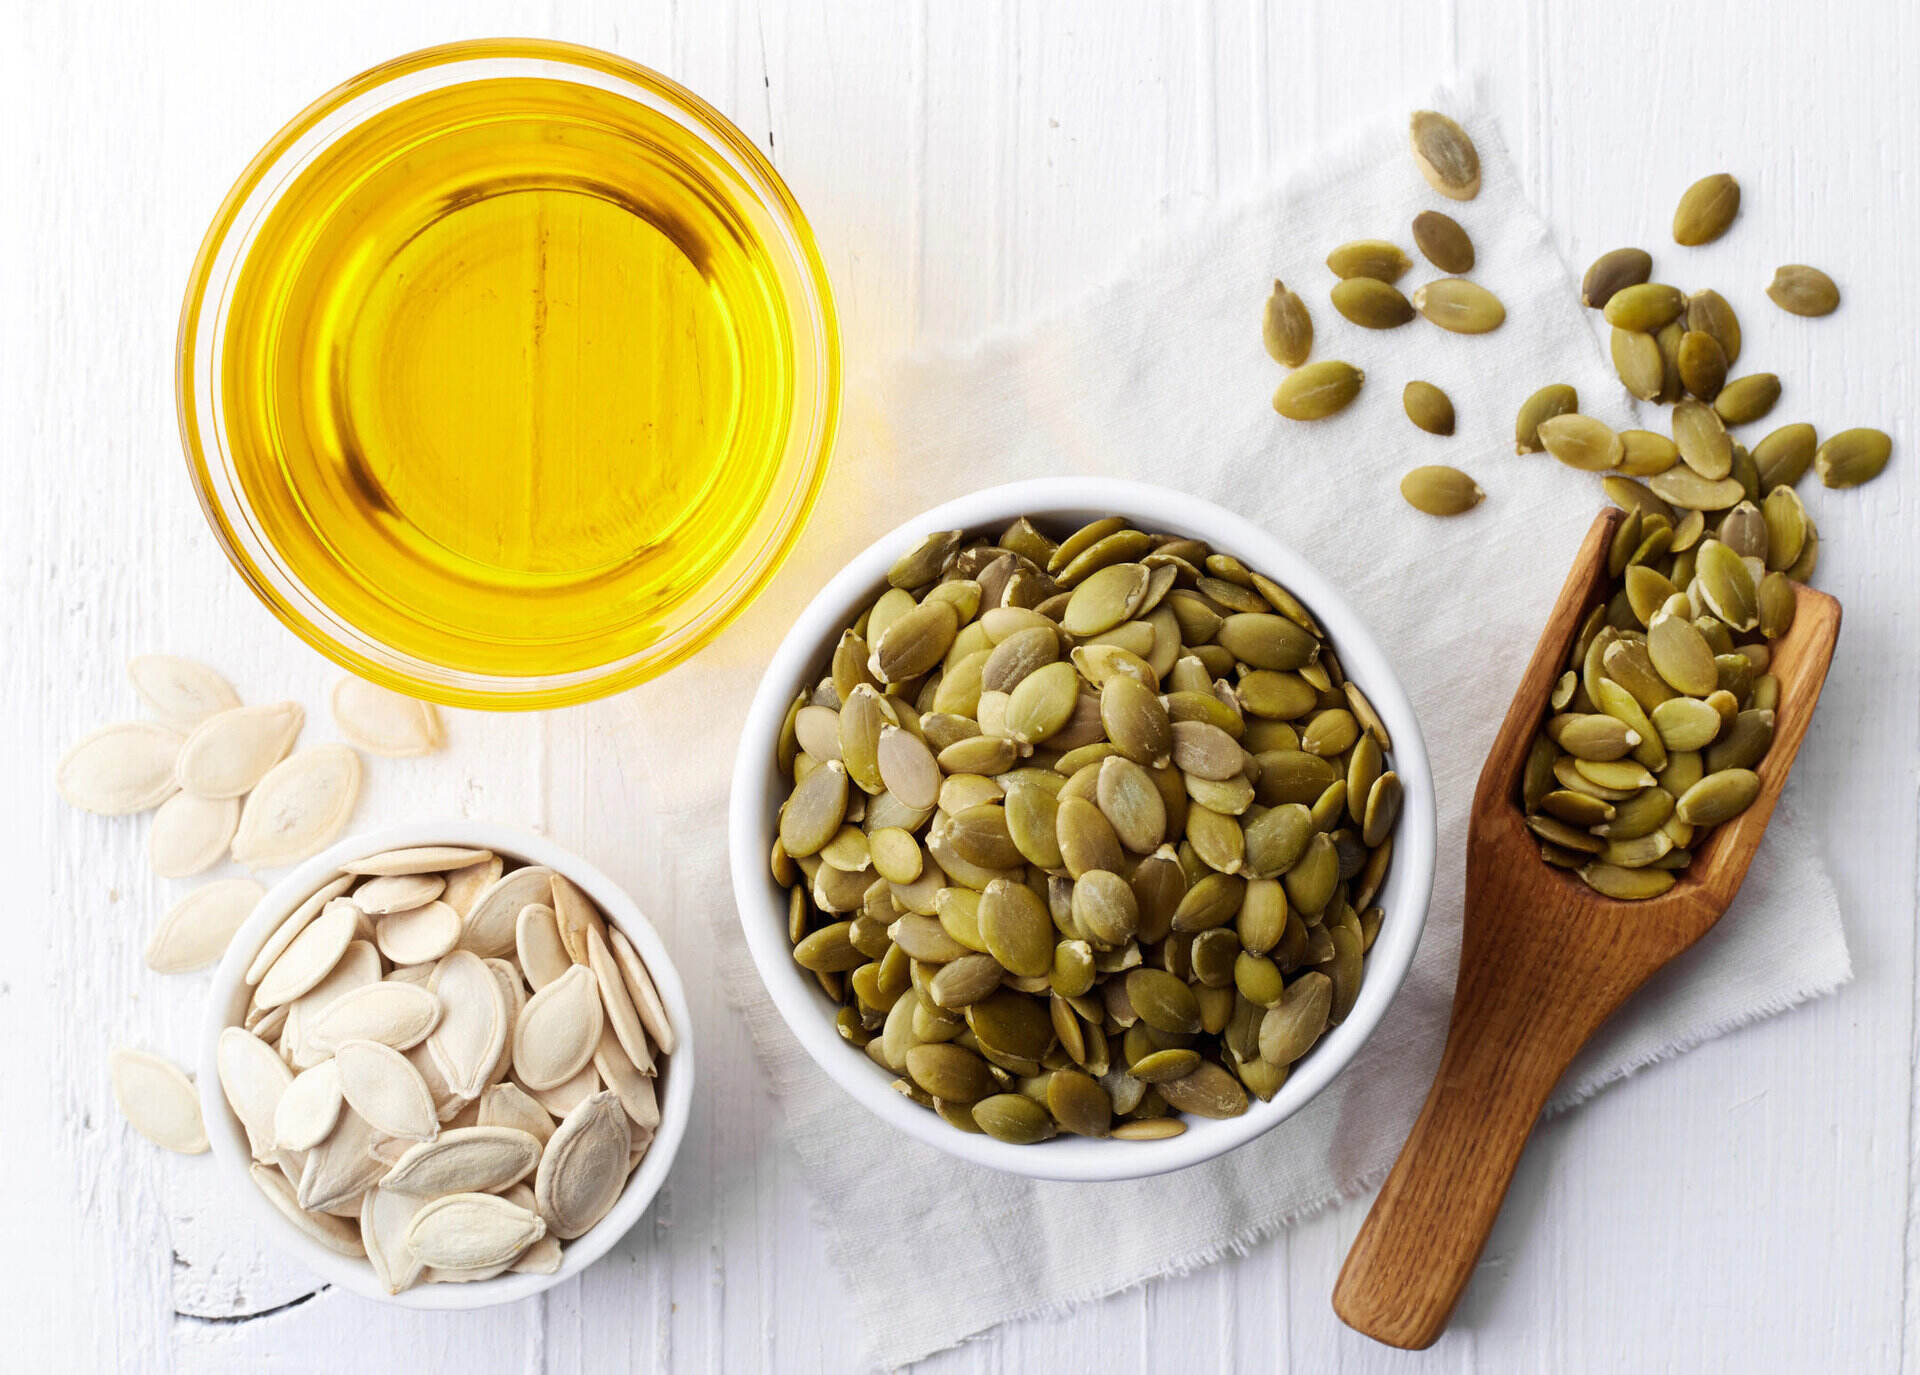 How To Use Pumpkin Seed Oil For Hair Growth